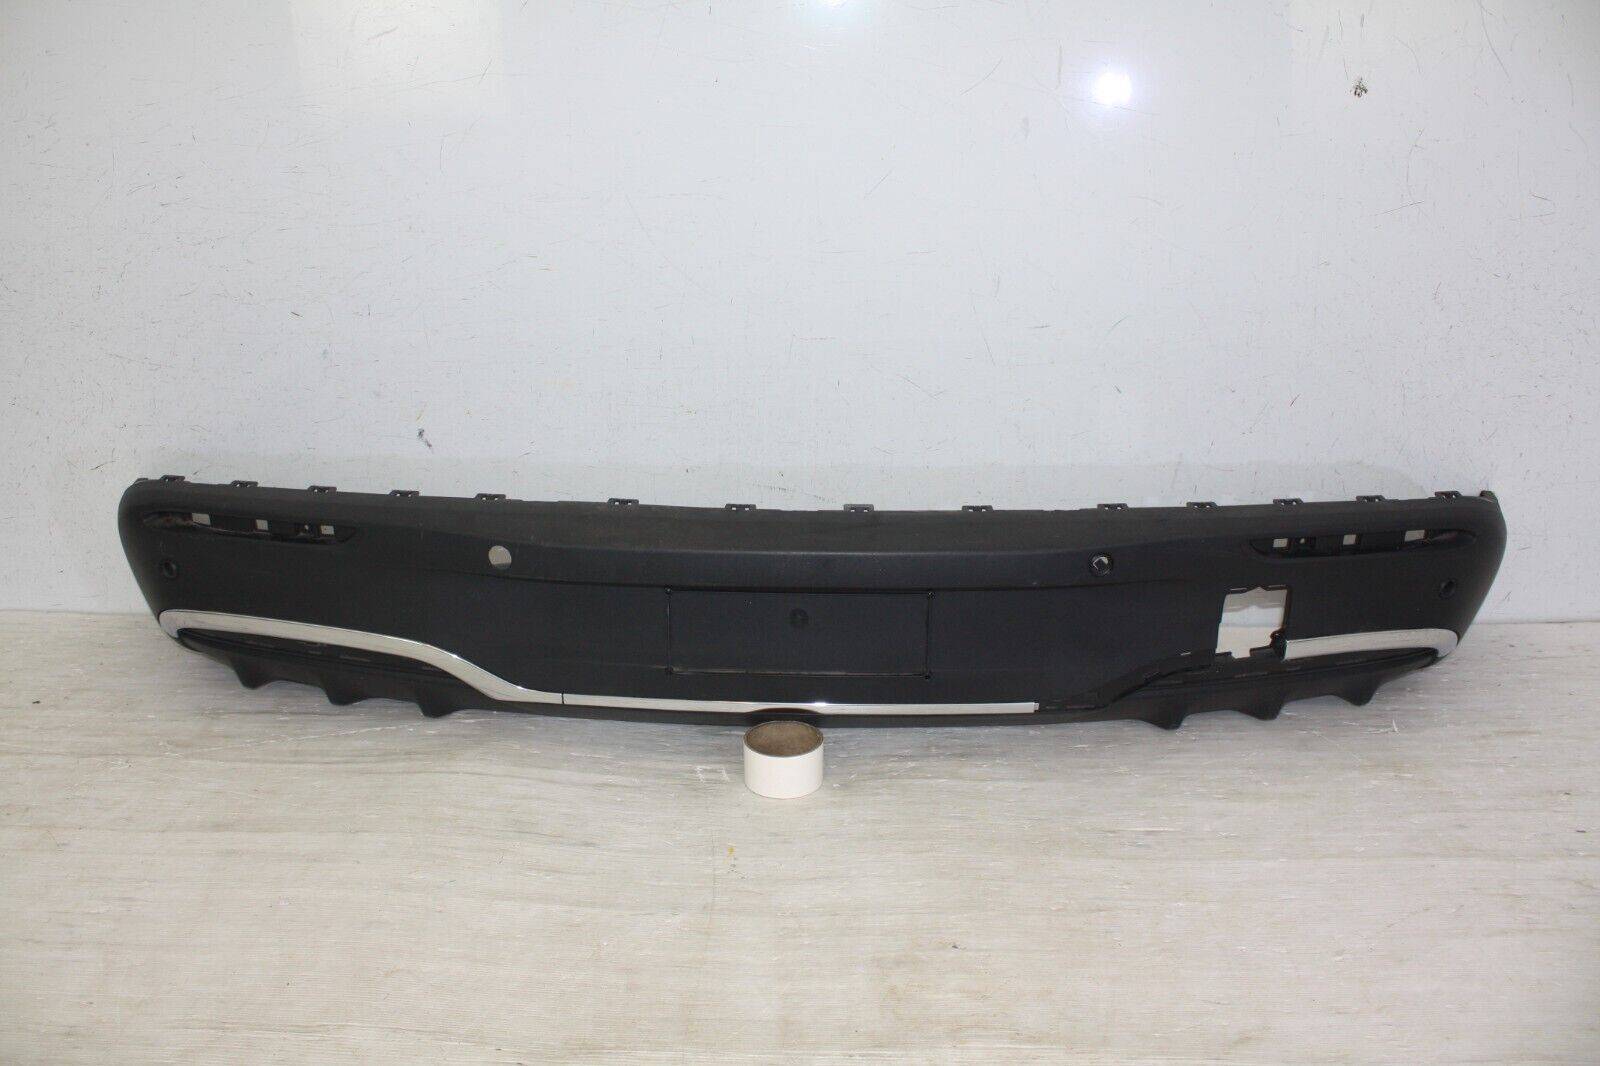 Mercedes EQA H243 Rear Bumper Lower Section 2021 ON A2438859101 Genuine 176005860347